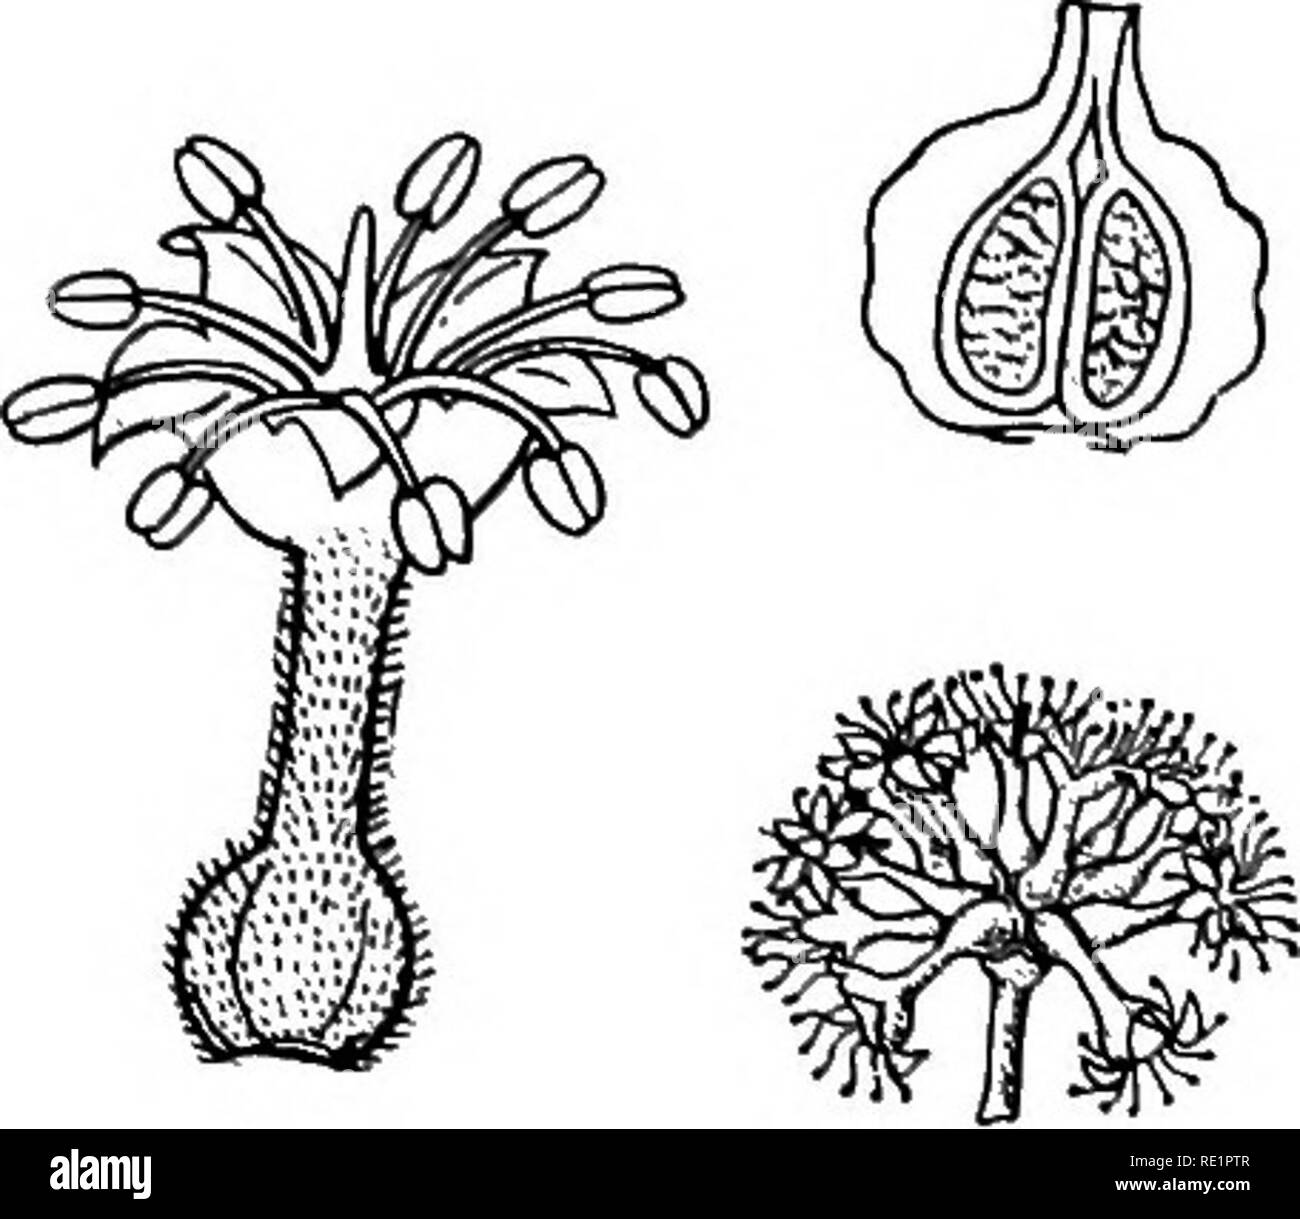 . A manual of Indian botany. Botany. CALYCIFLOR^ 217 2 whorls inserted on the tube or Hmbs of the superior calyx. Ovary inferior, i-celled. Fruit indehiscent, drupaceous or leathery. Seed solitary, exalbuminous. Chiefly tropical. The common plants are deshi- badam or Country Almond (Terminalia Catappa); the kernel of its nut is edible, and the thick pericarp is full of air-chambers; this makes the fruits light and impervious to water, so that they are disseminated through the agency of running water without any harm to the germinating power of the enclosed seeds. Bats also help in the distribu Stock Photo